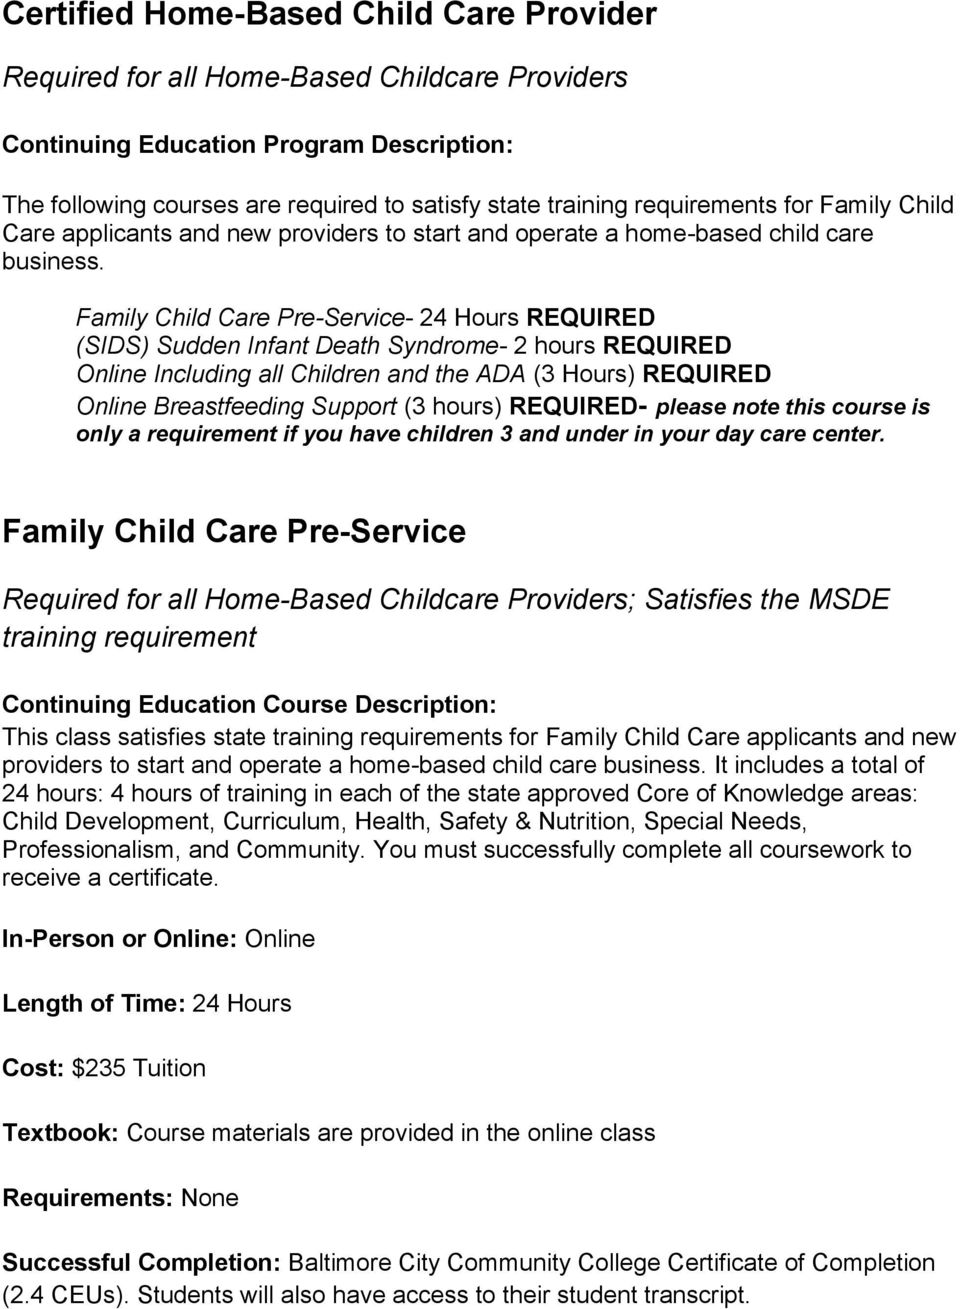 ada online training for child care